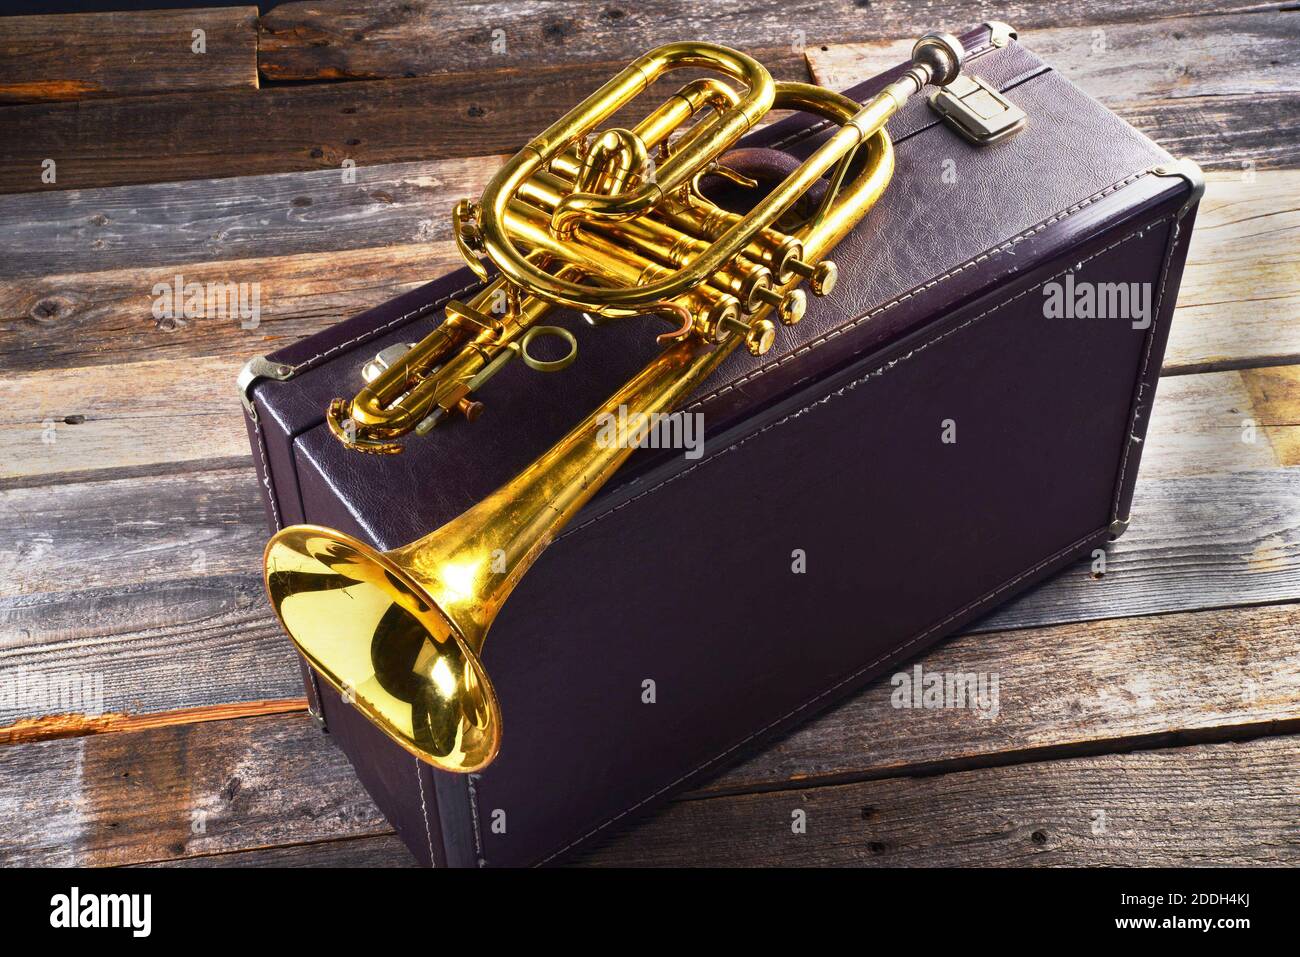 Old brass trumpet with traveling leather case. Stock Photo